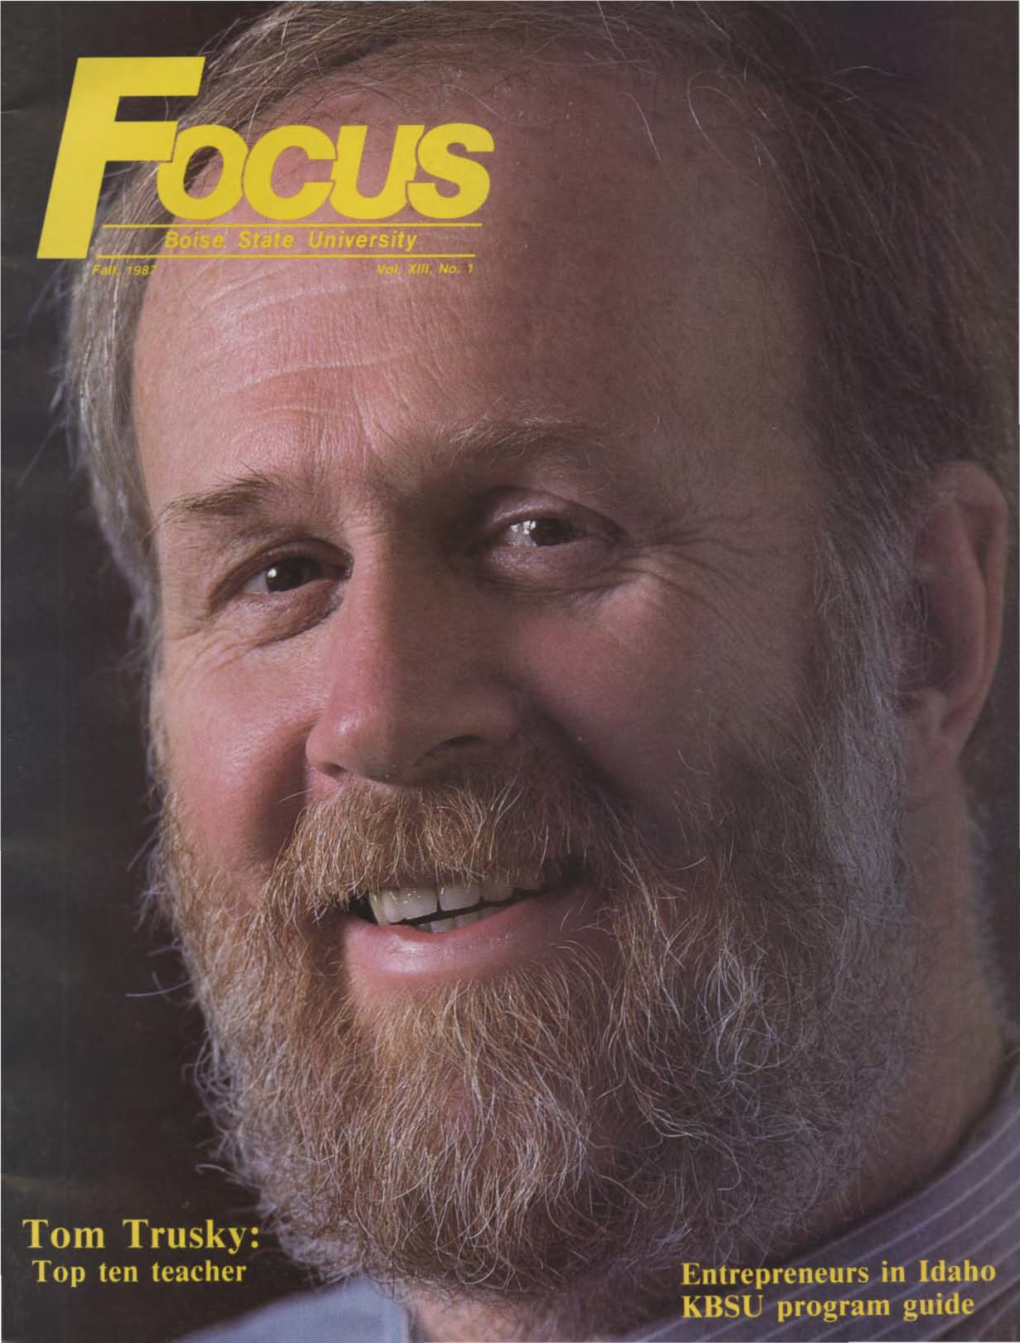 FOCUS Is Published Quarterly by the Boise State University Office of News Services, 1910 University Drive, Boise, 1063725